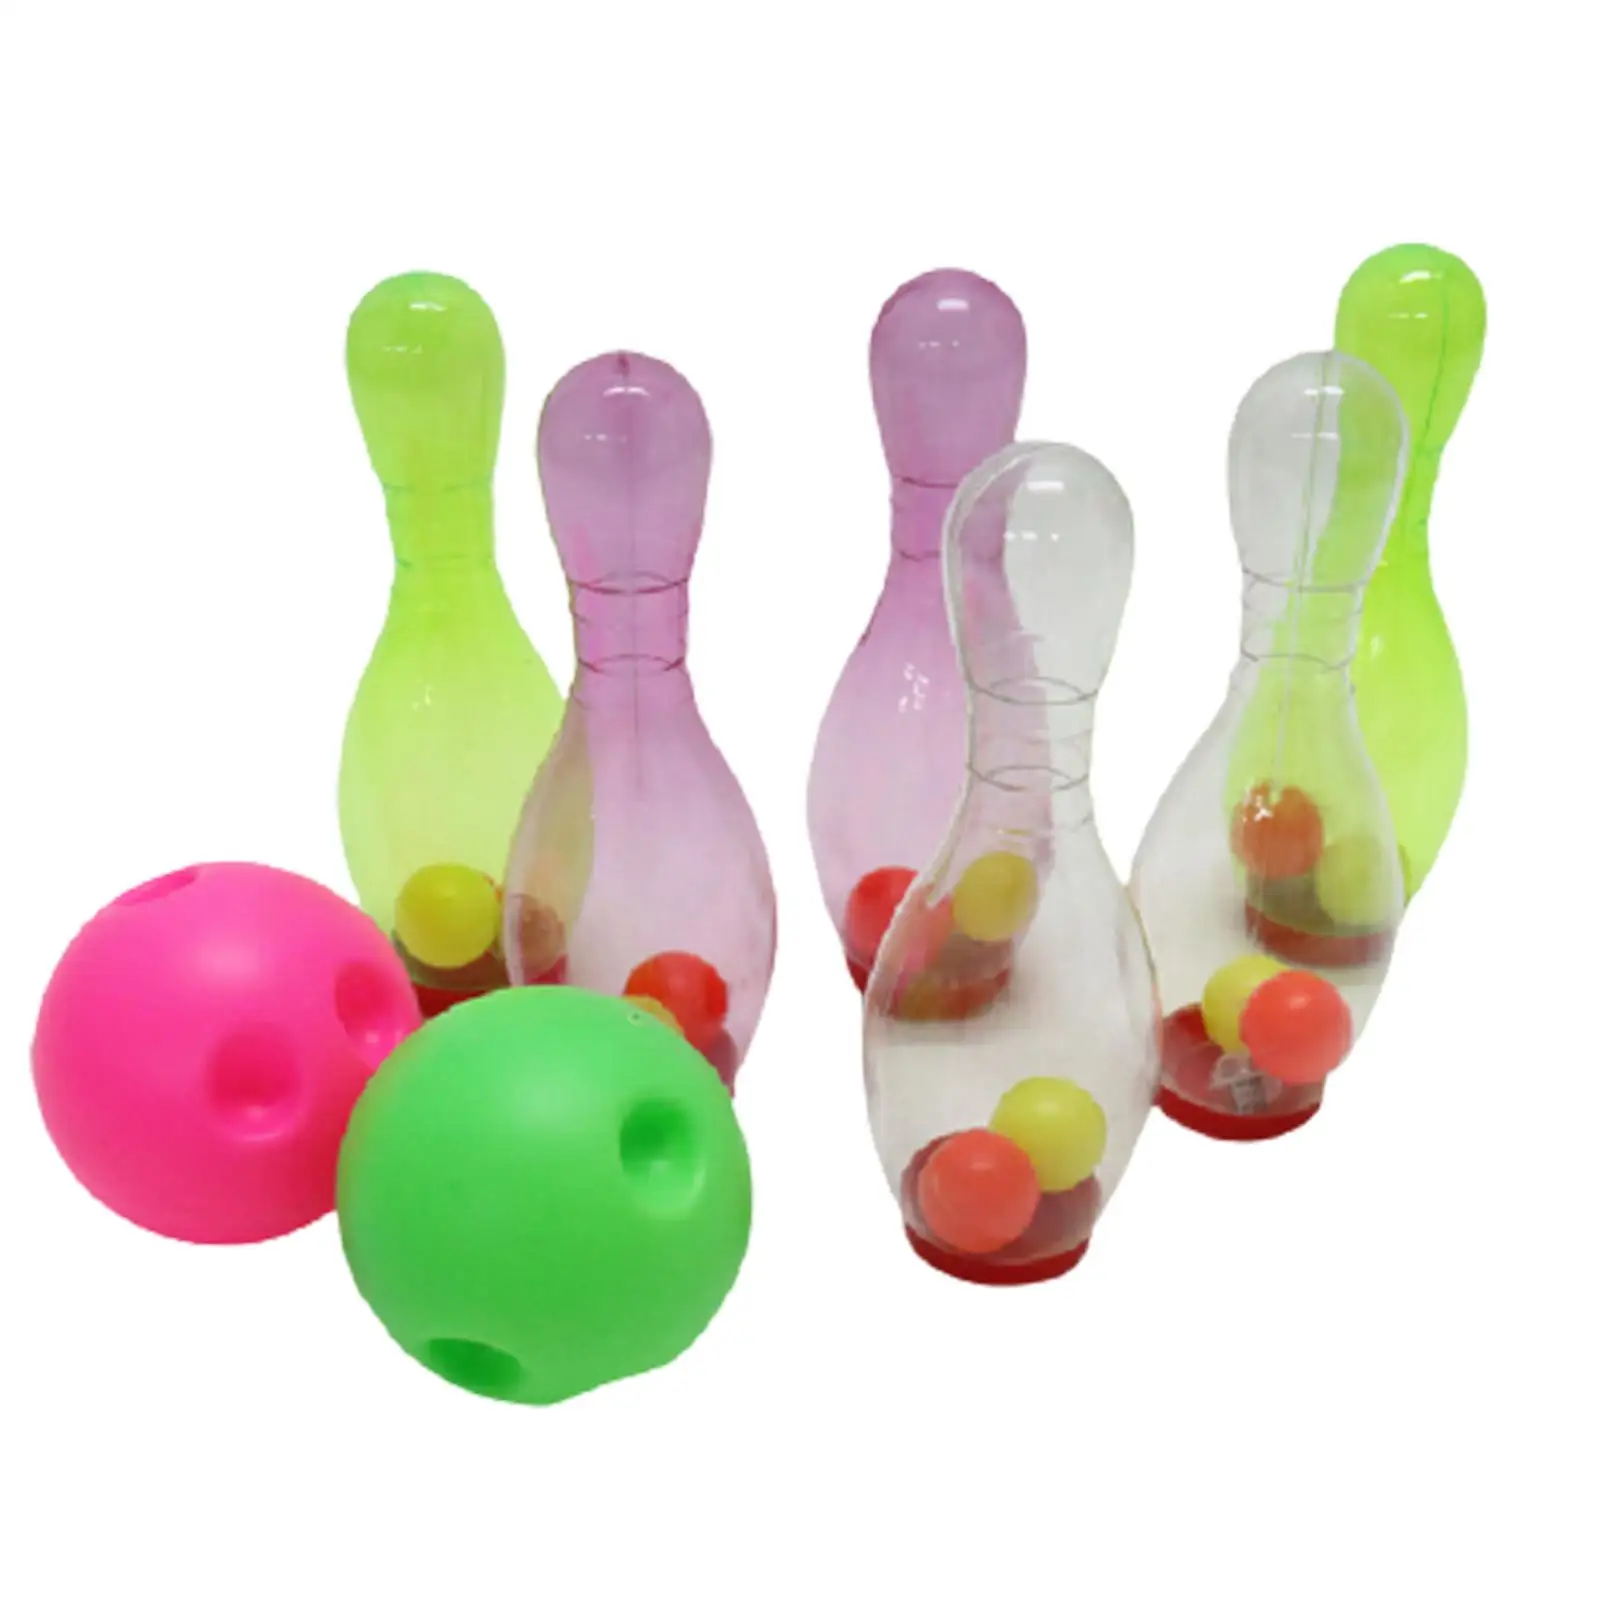 Kids Bowling Play Set Light up Development Toy LED Bowling Pins for Kids